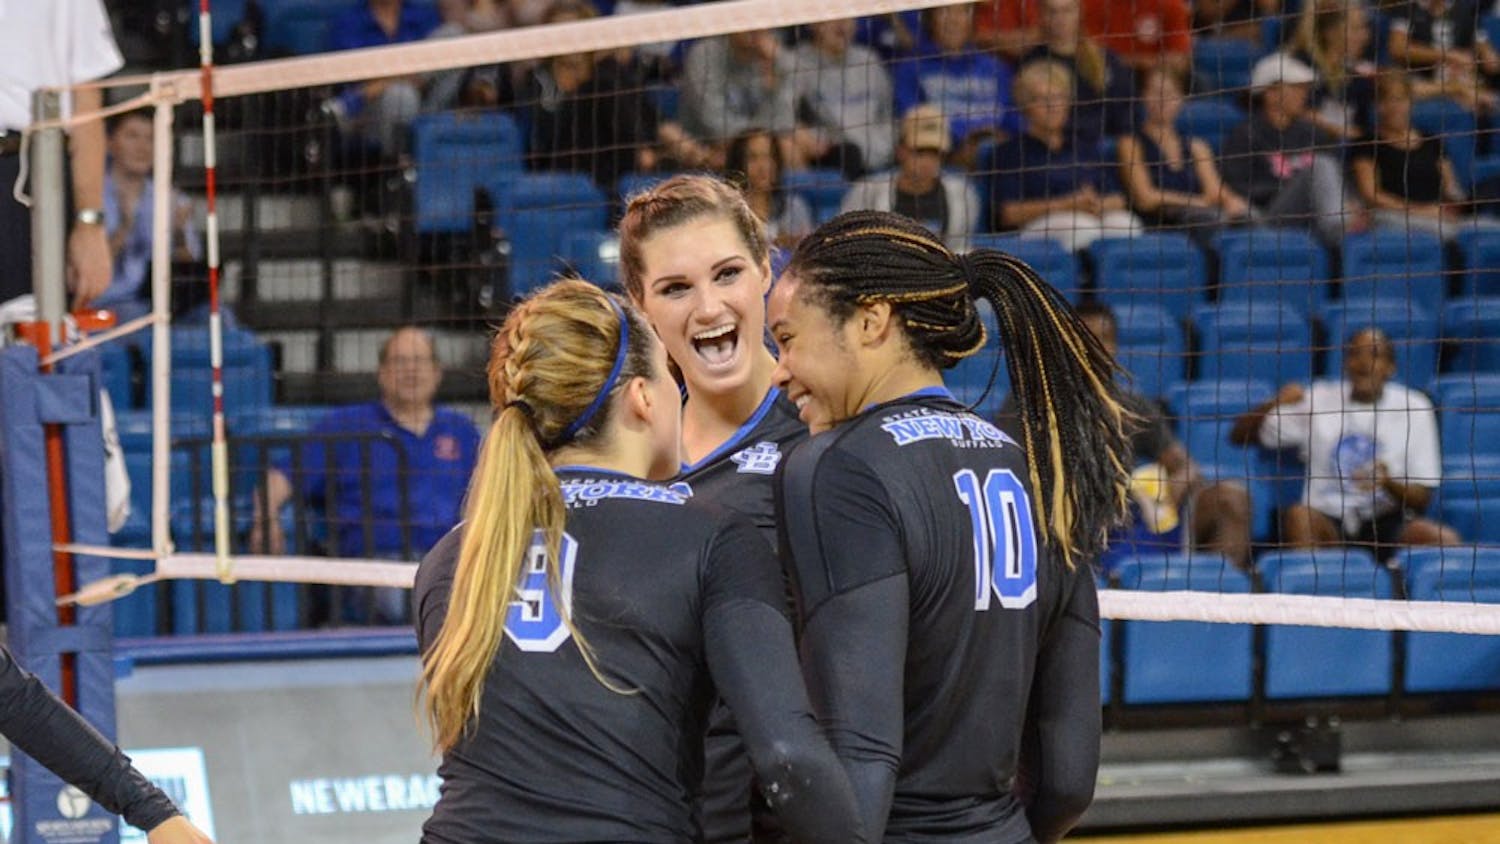 (From left to right) Senior outside hitter Marissa Prinzbach, freshman middle blocker Megan Wernette and senior middle blocker Akeila Lain celebrate in a&nbsp;game in Alumni Arena earlier this season. The Bulls' season ended Thursday night with a 3-1 loss to Ball State in the MAC Tournament.&nbsp;